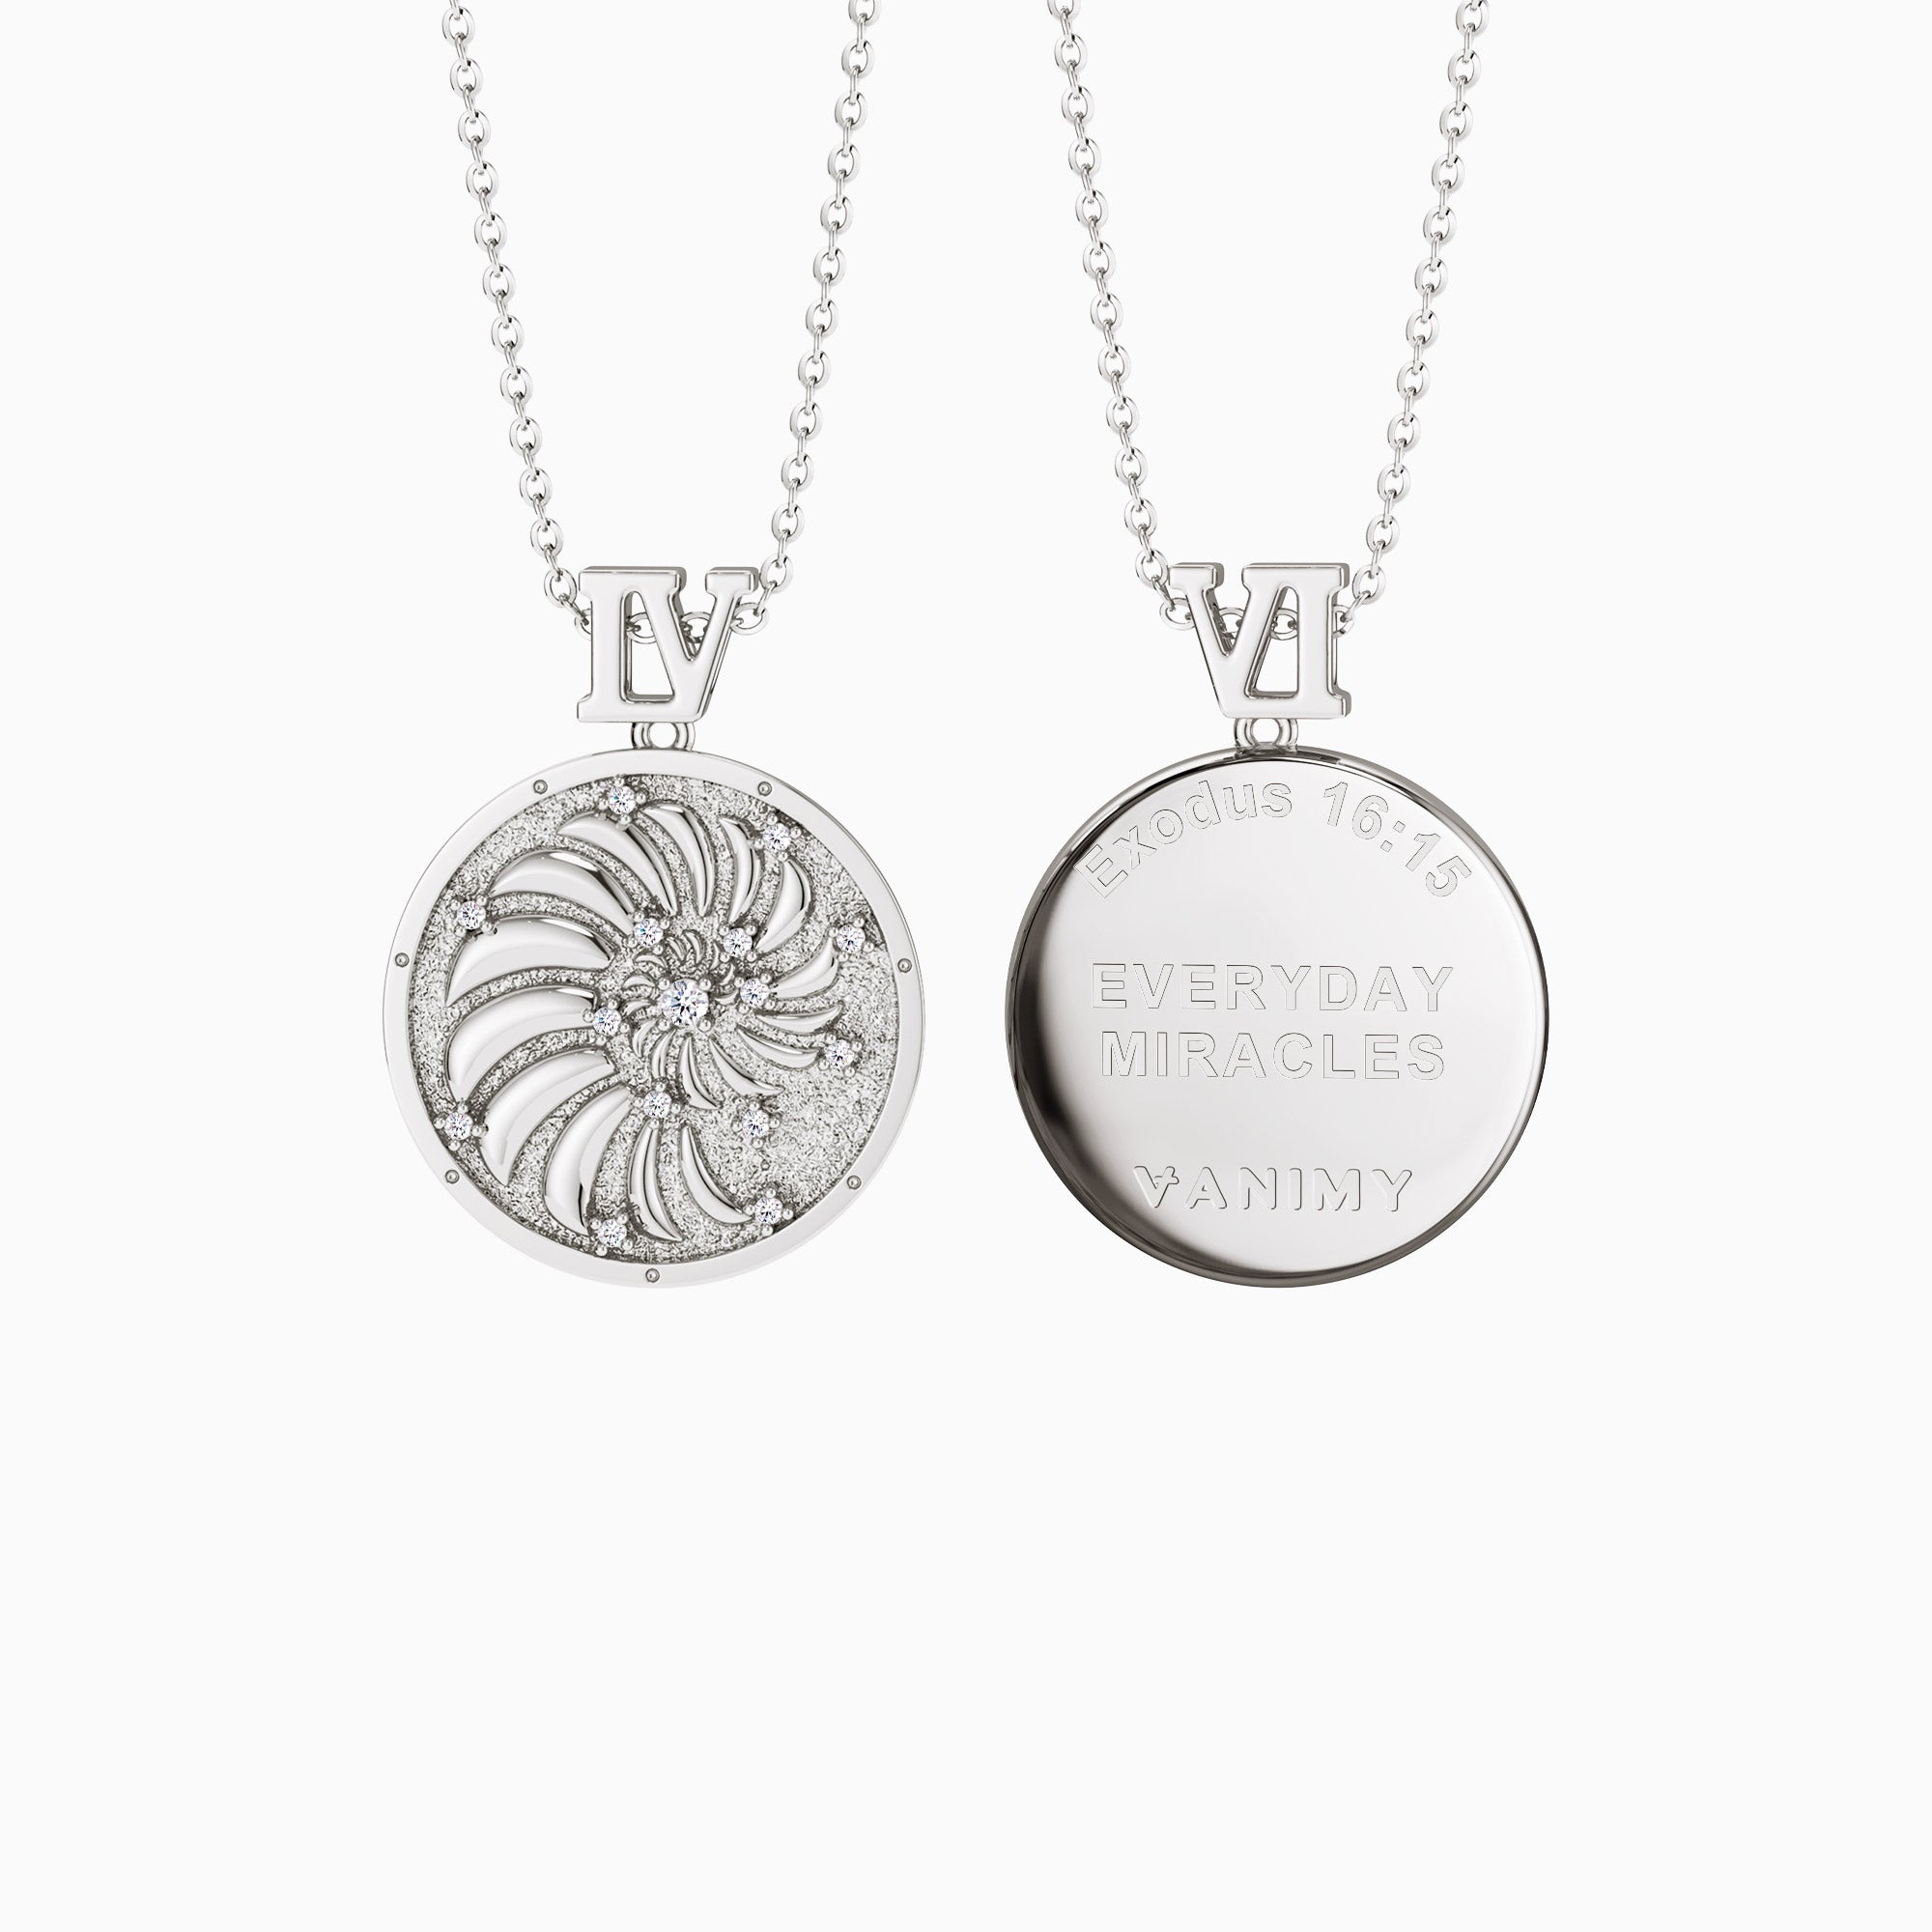 Promised Land Everyday Miracles Blessings Spiral Coin Medallion Necklace - vanimy